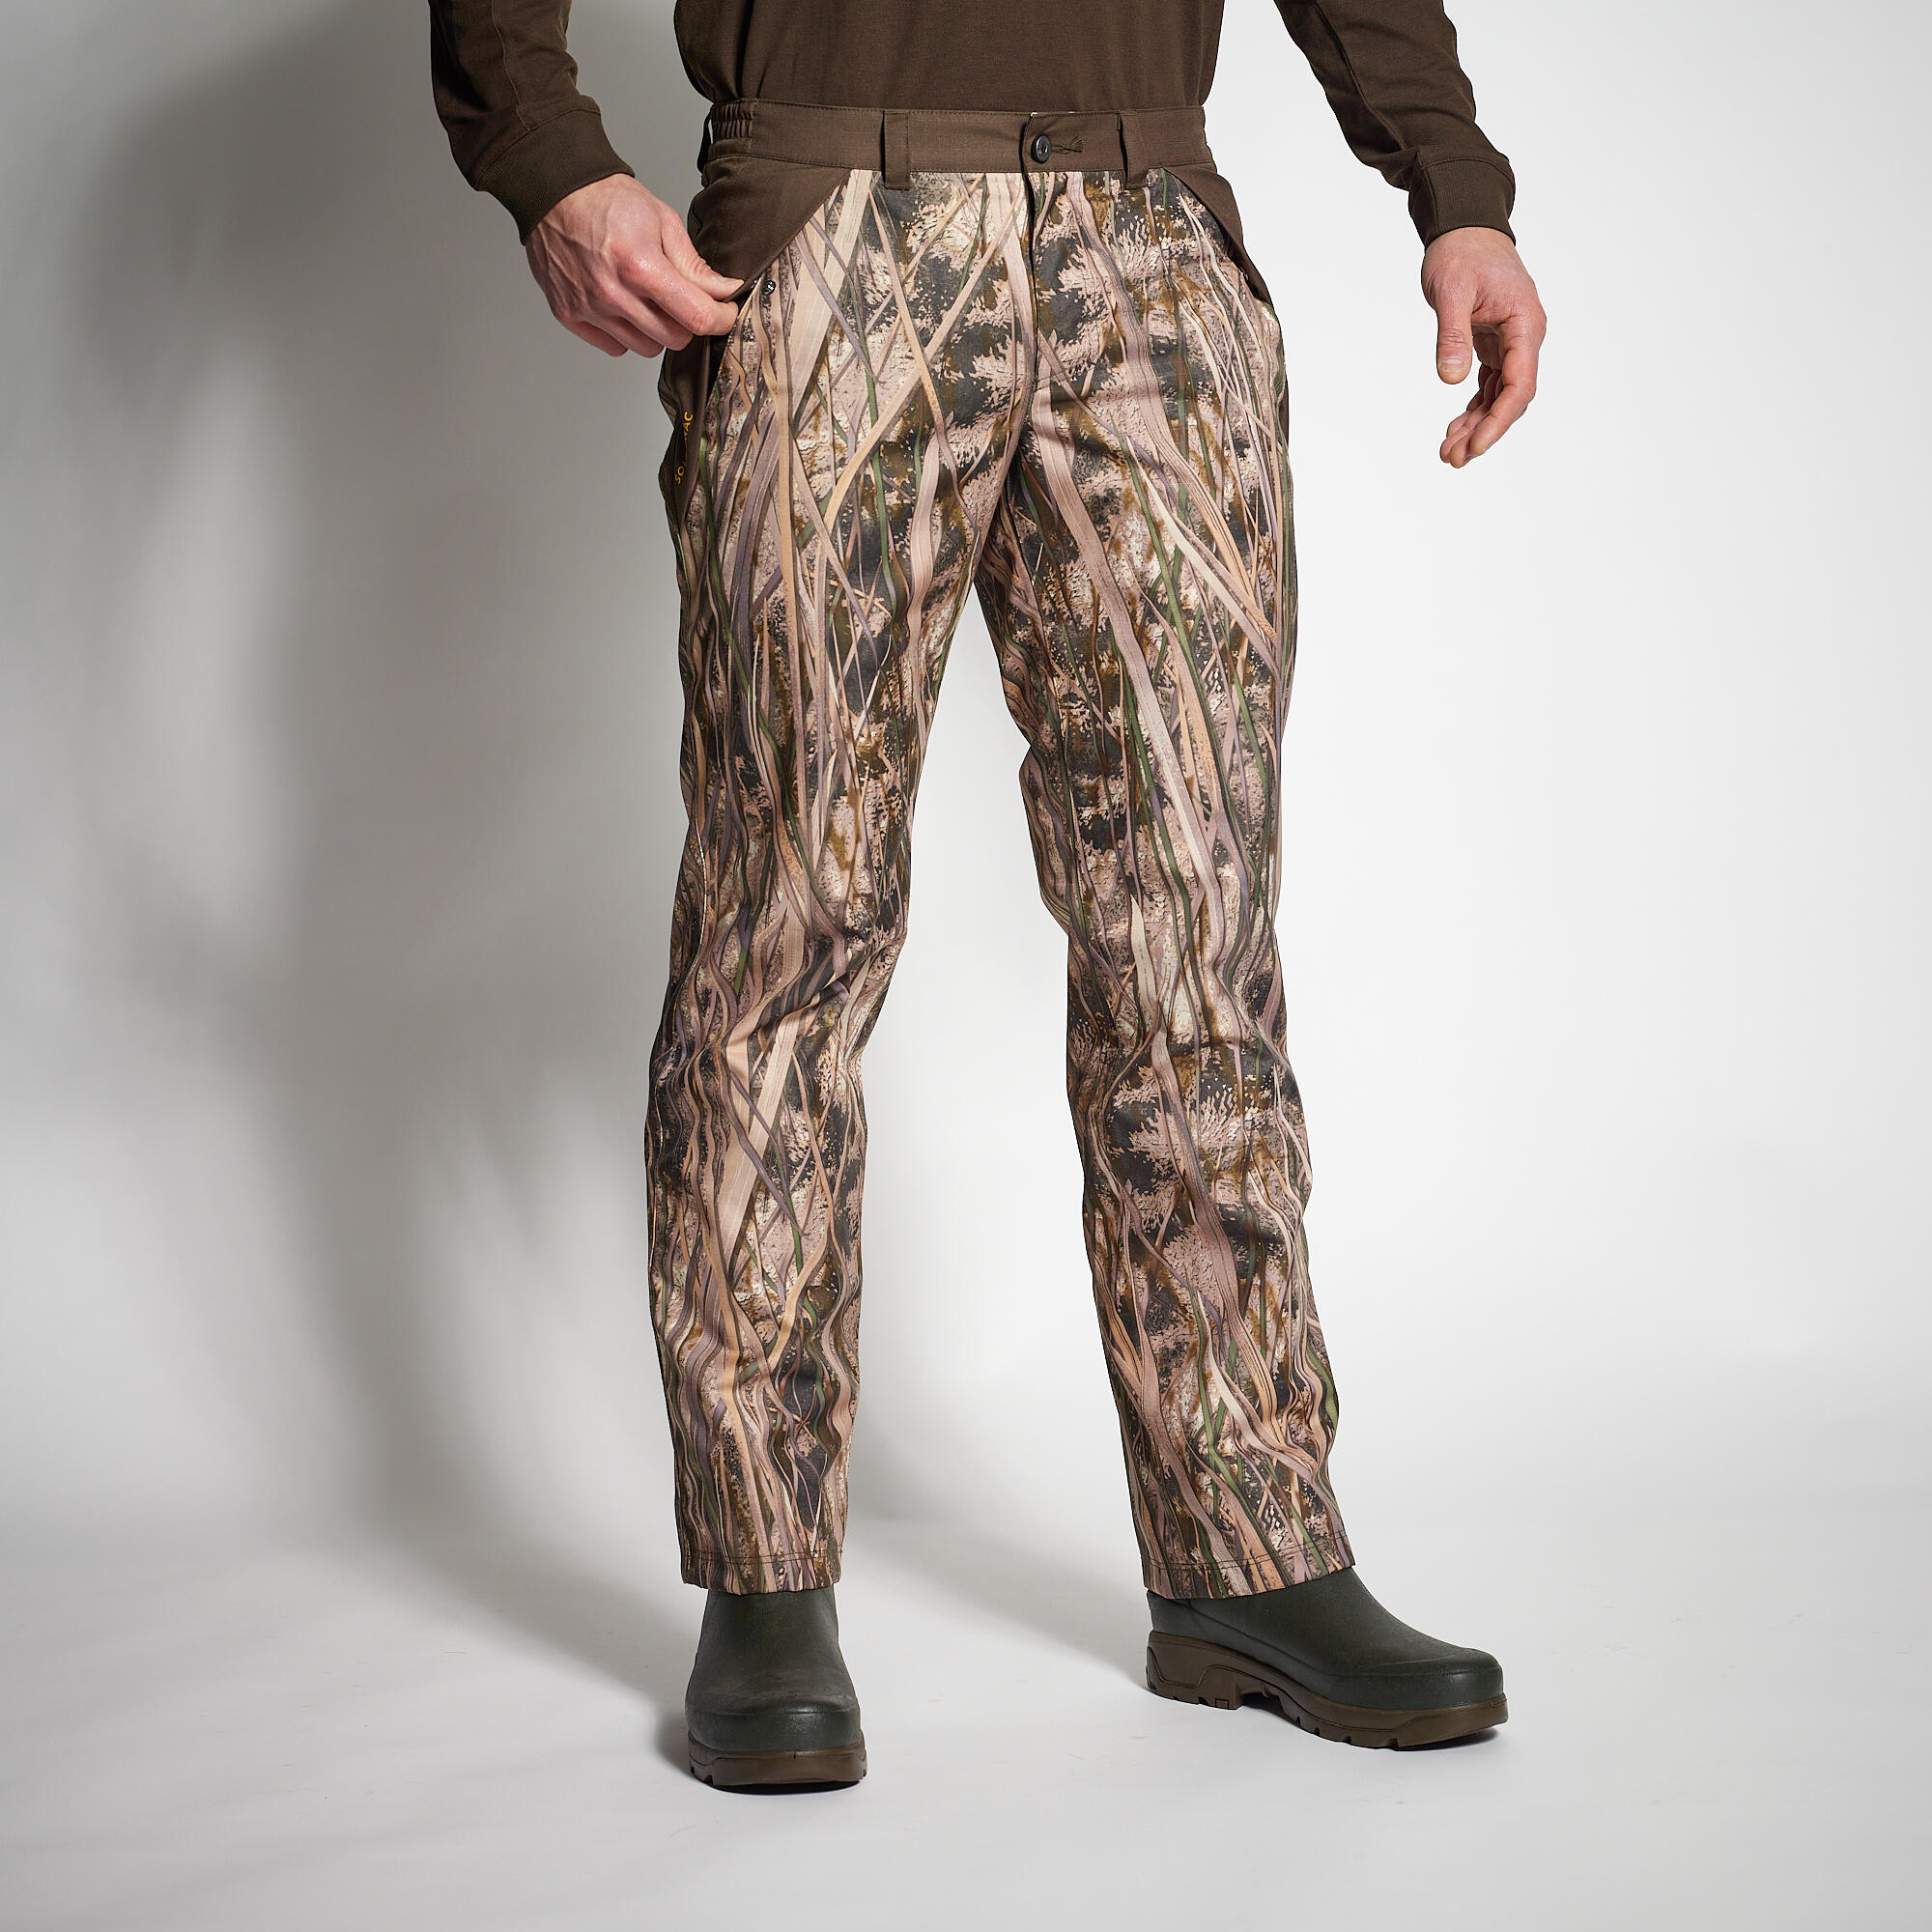 Buy Solognac Steppe 300 Hunting Trousers  Grey L Online at Low Prices in  India  Amazonin